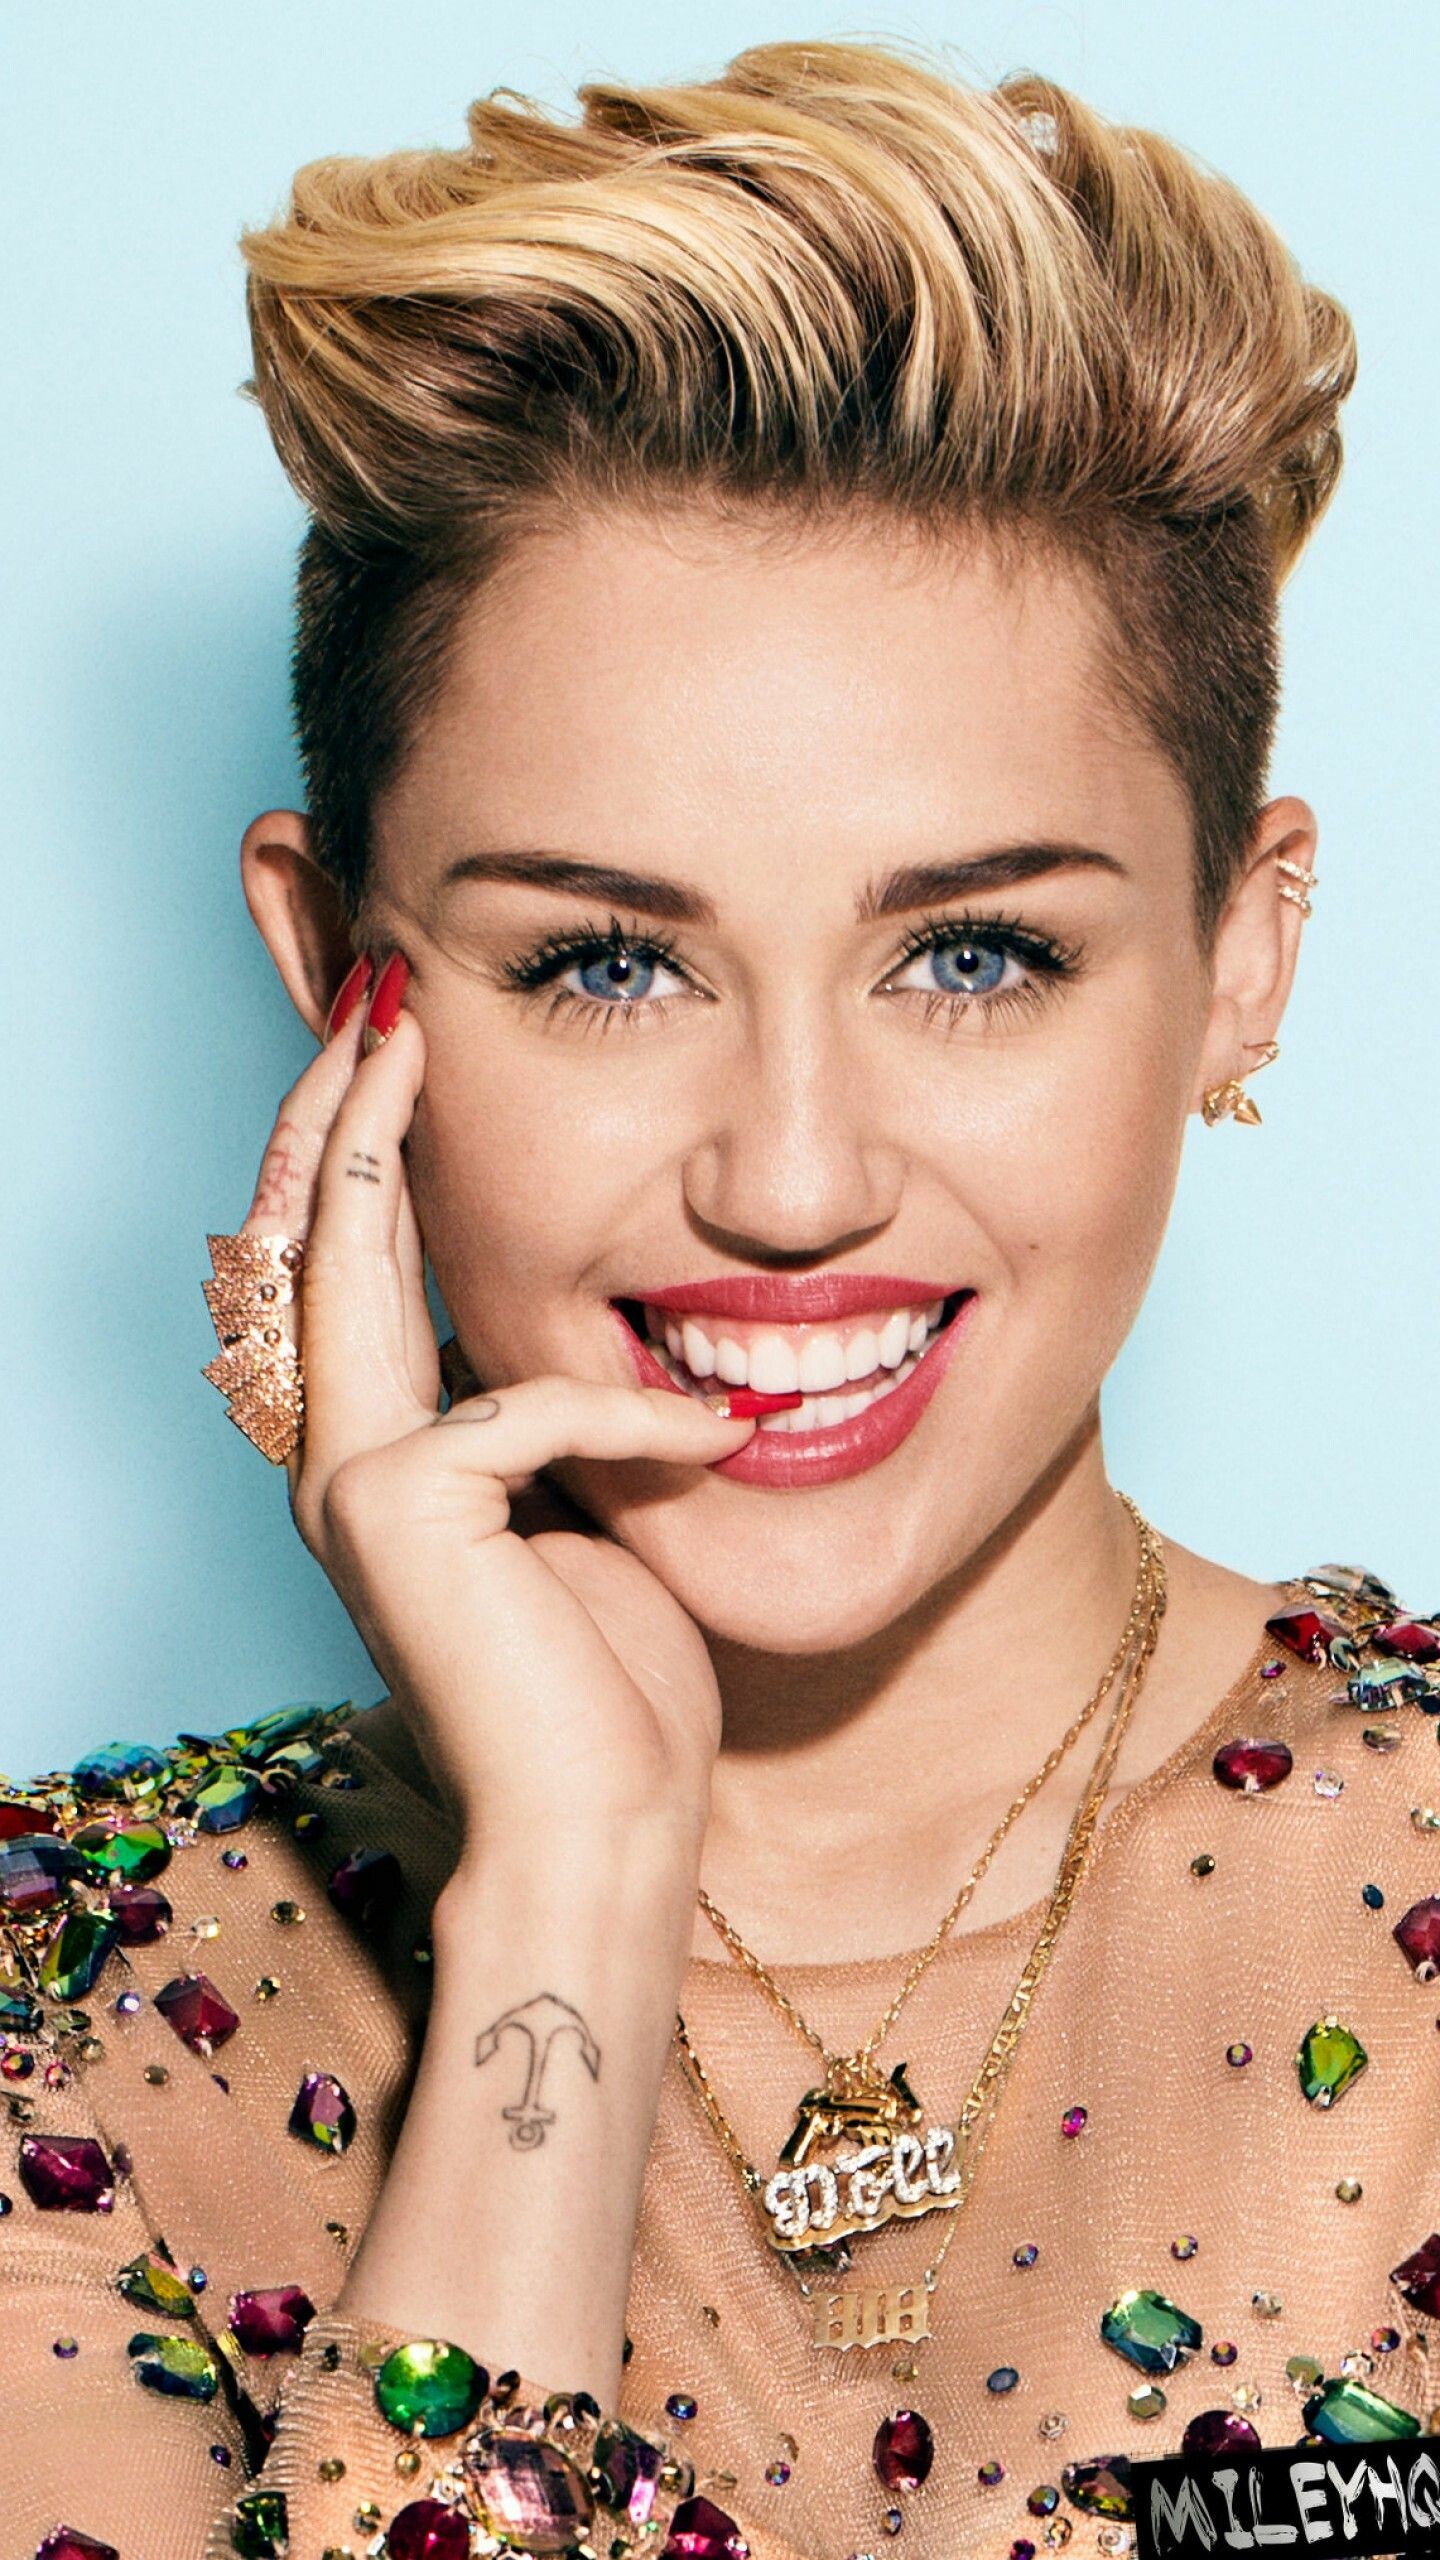 Miley Cirus, 4k HD wallpapers, Miley Cyrus backgrounds, 1440x2560 HD Phone